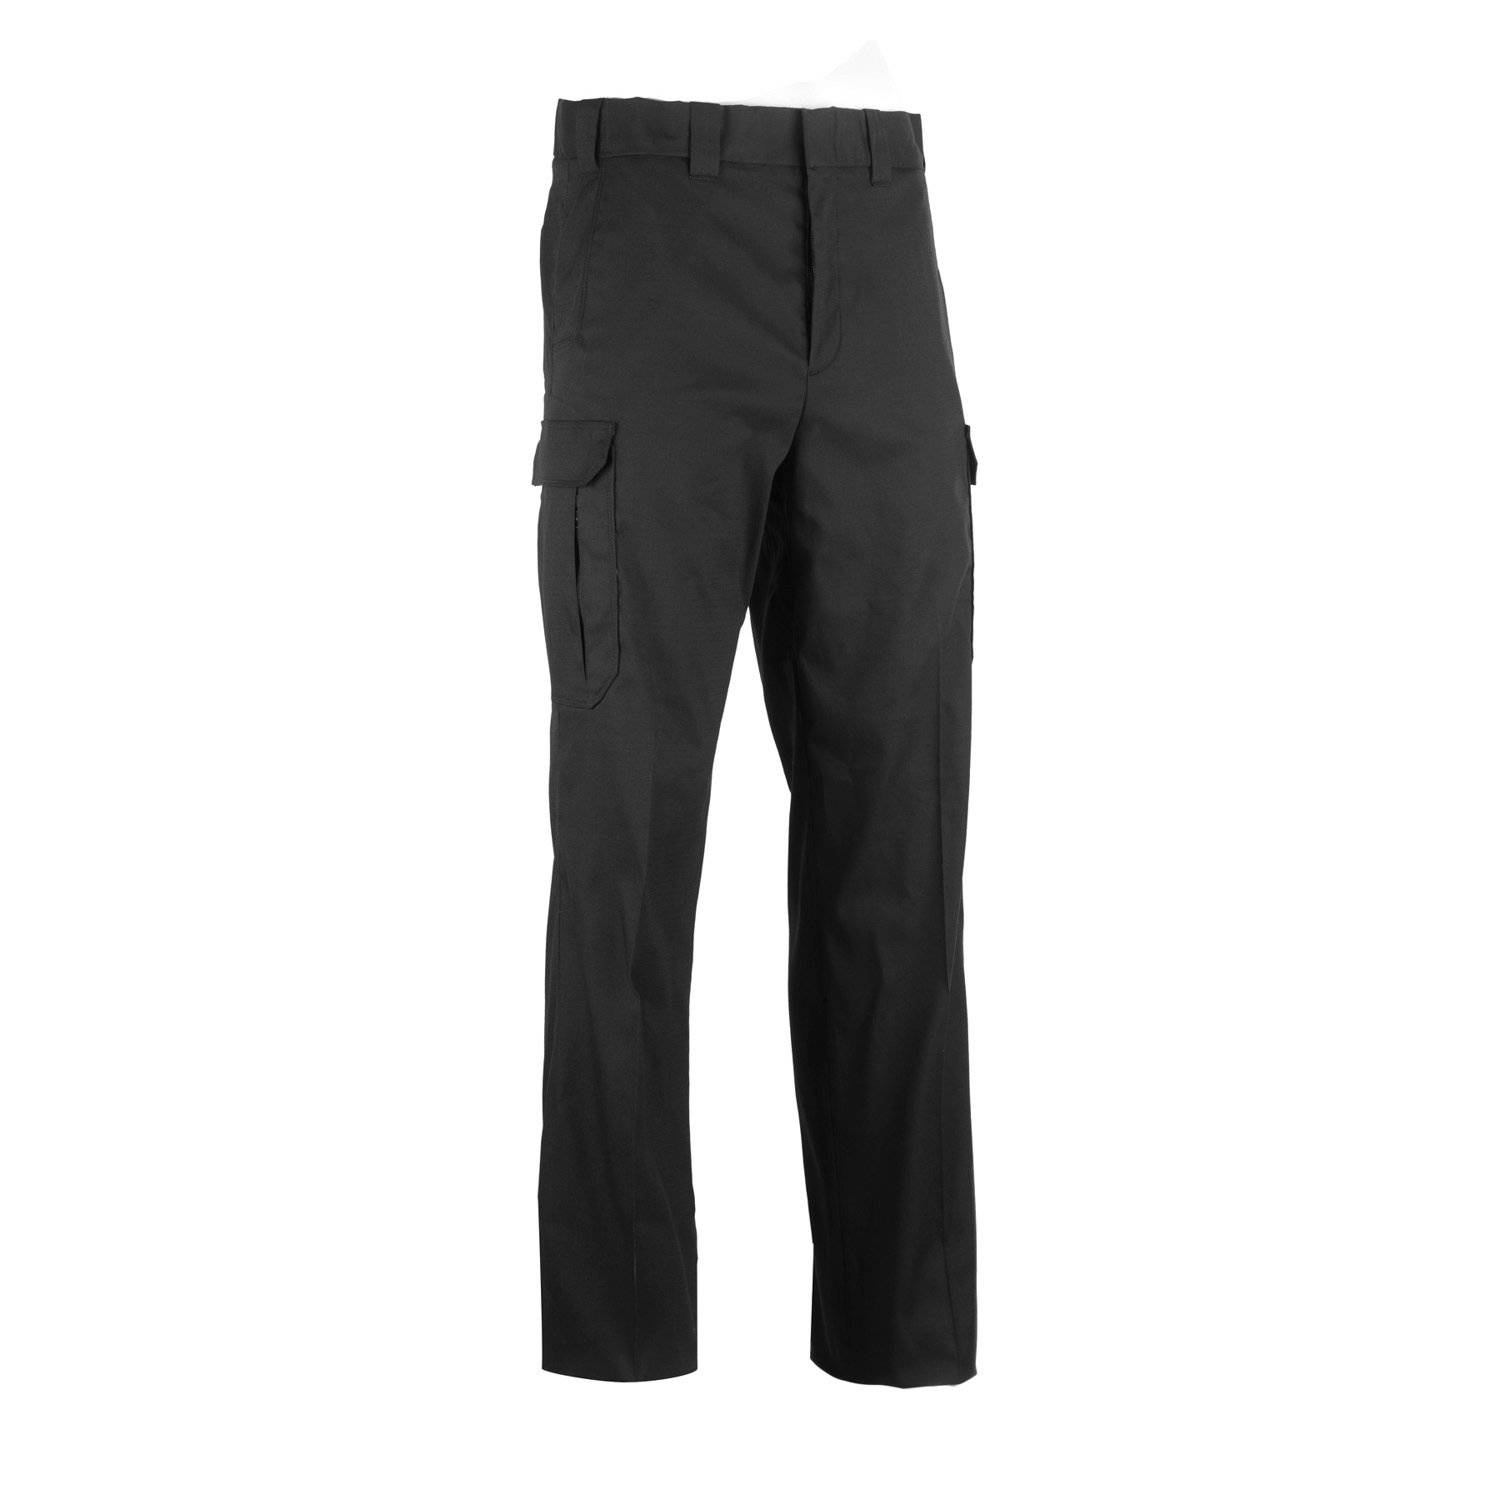 DELUXE TACTICAL 70% POLY/28%RAYON/2%LYCRA® MEN'S PANTS